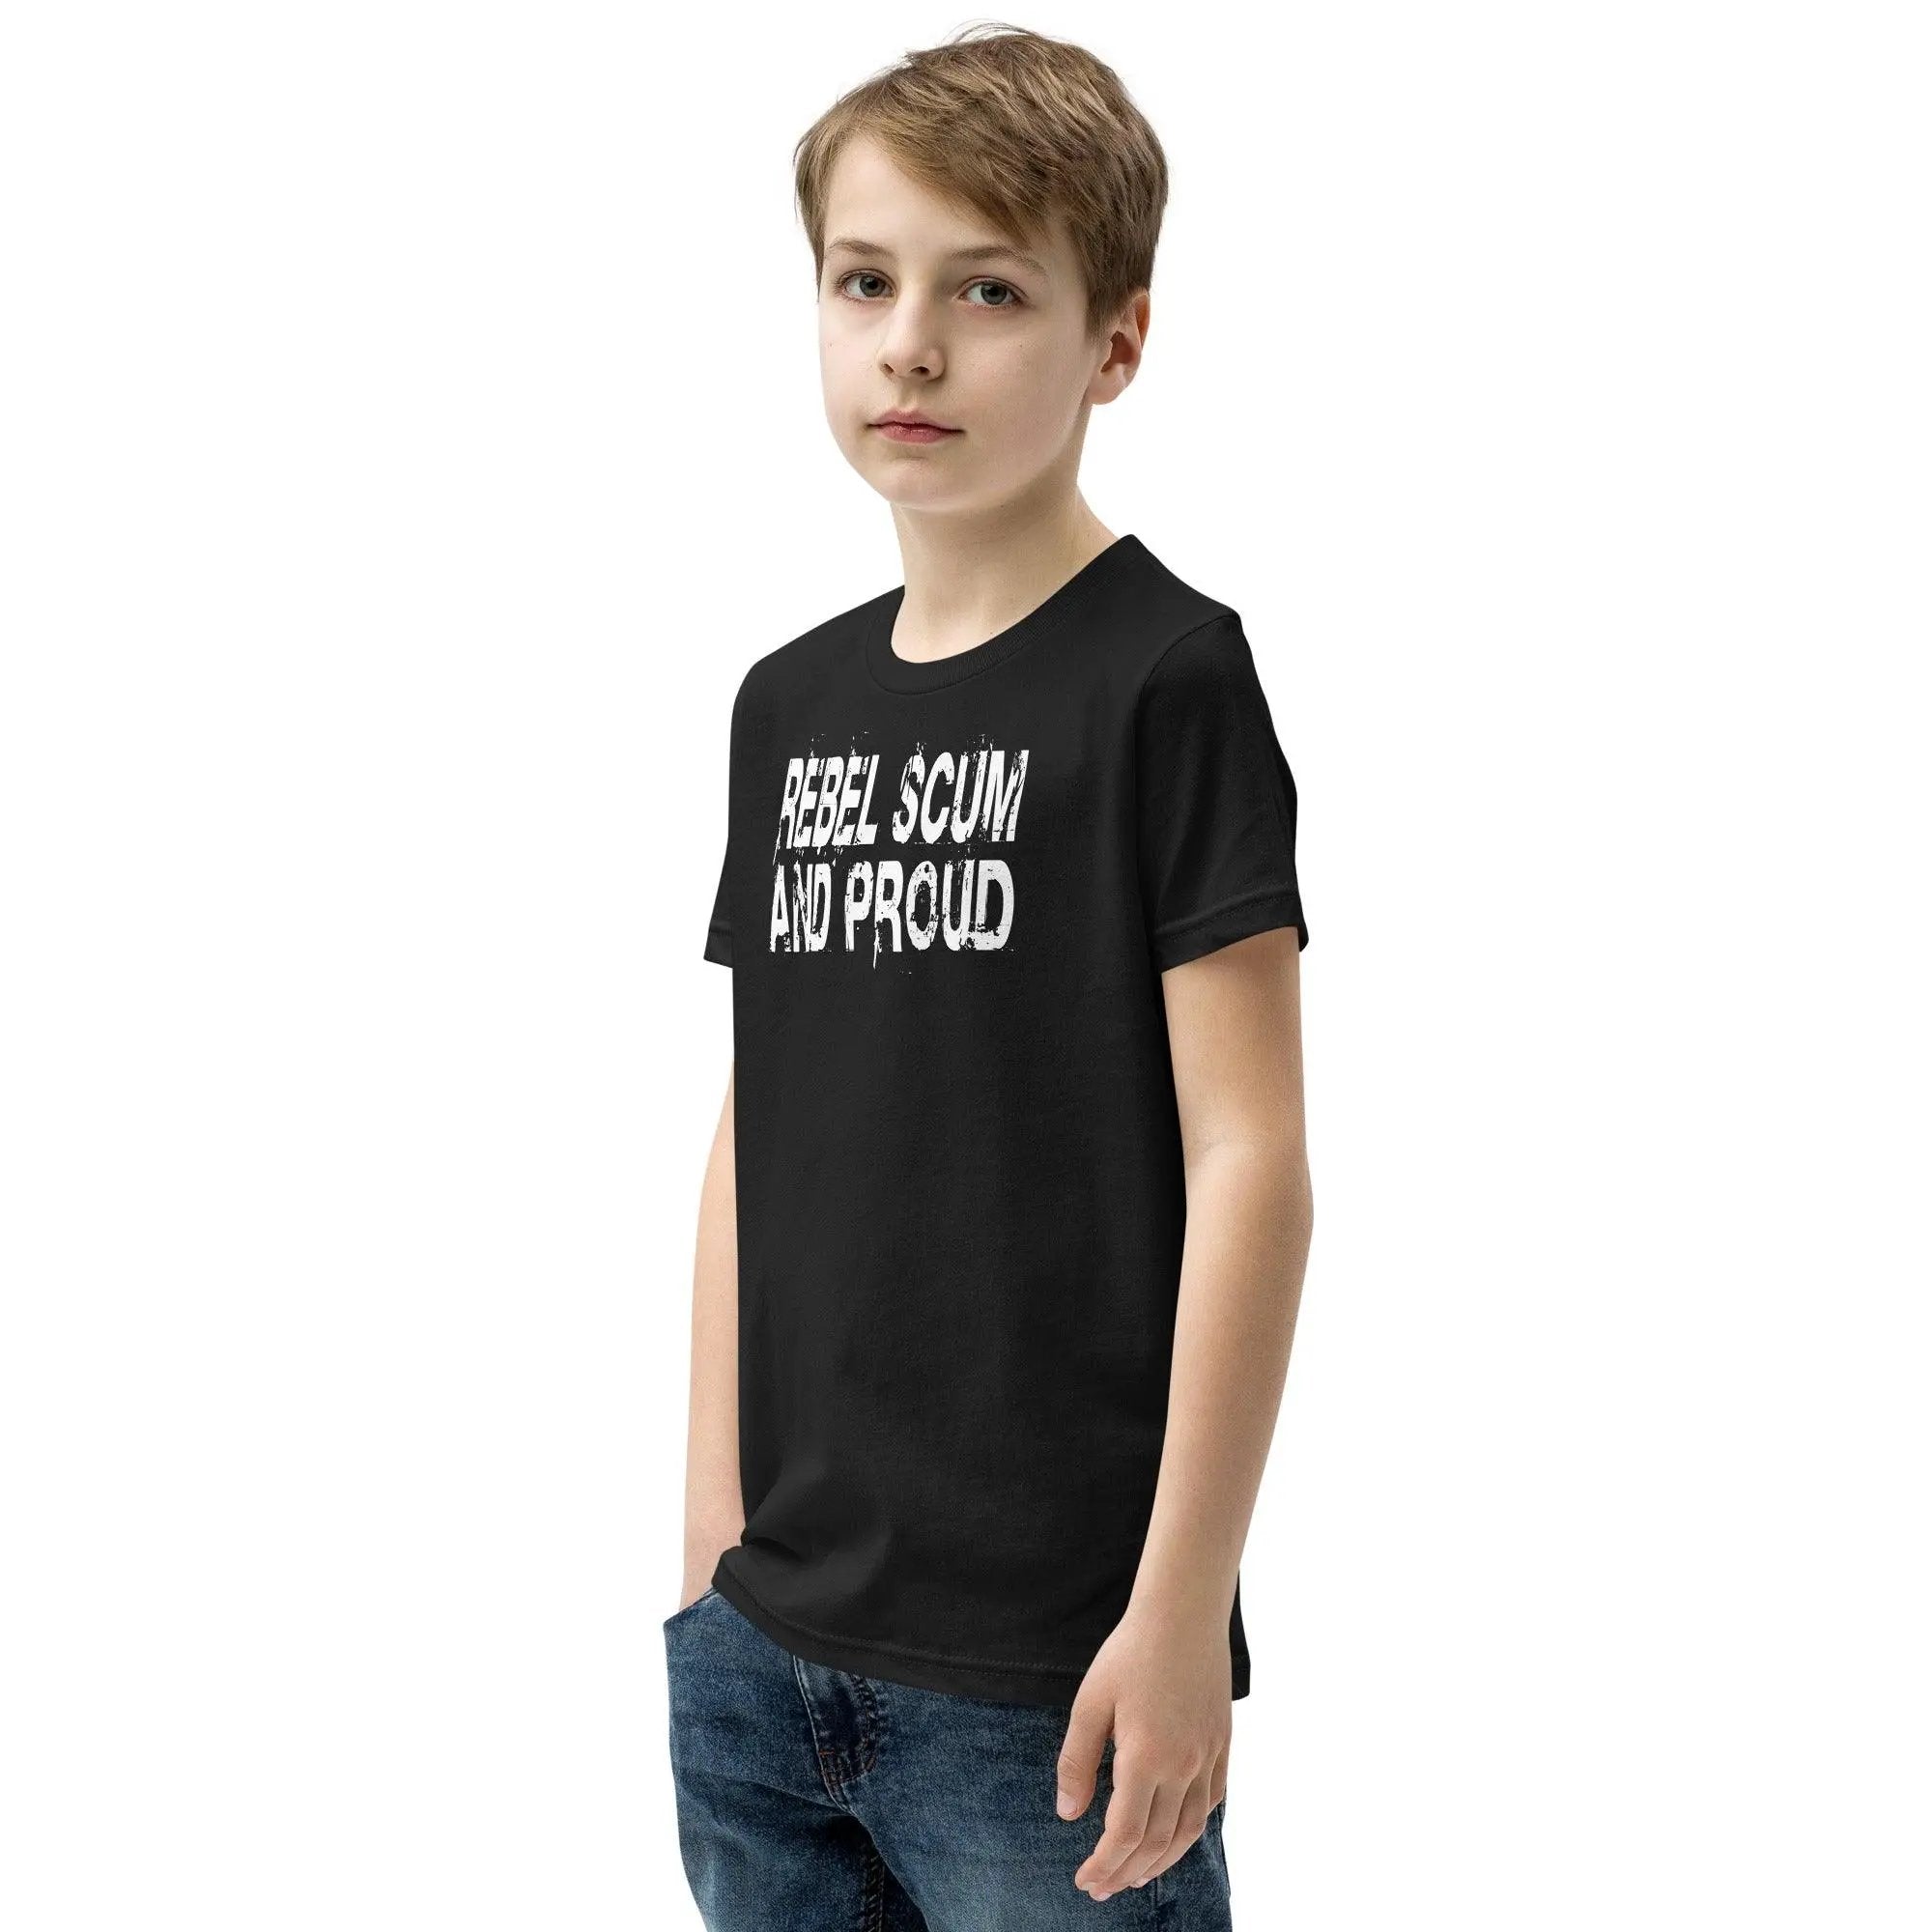 Rebel Scum and Proud Youth Short Sleeve T-Shirt VAWDesigns